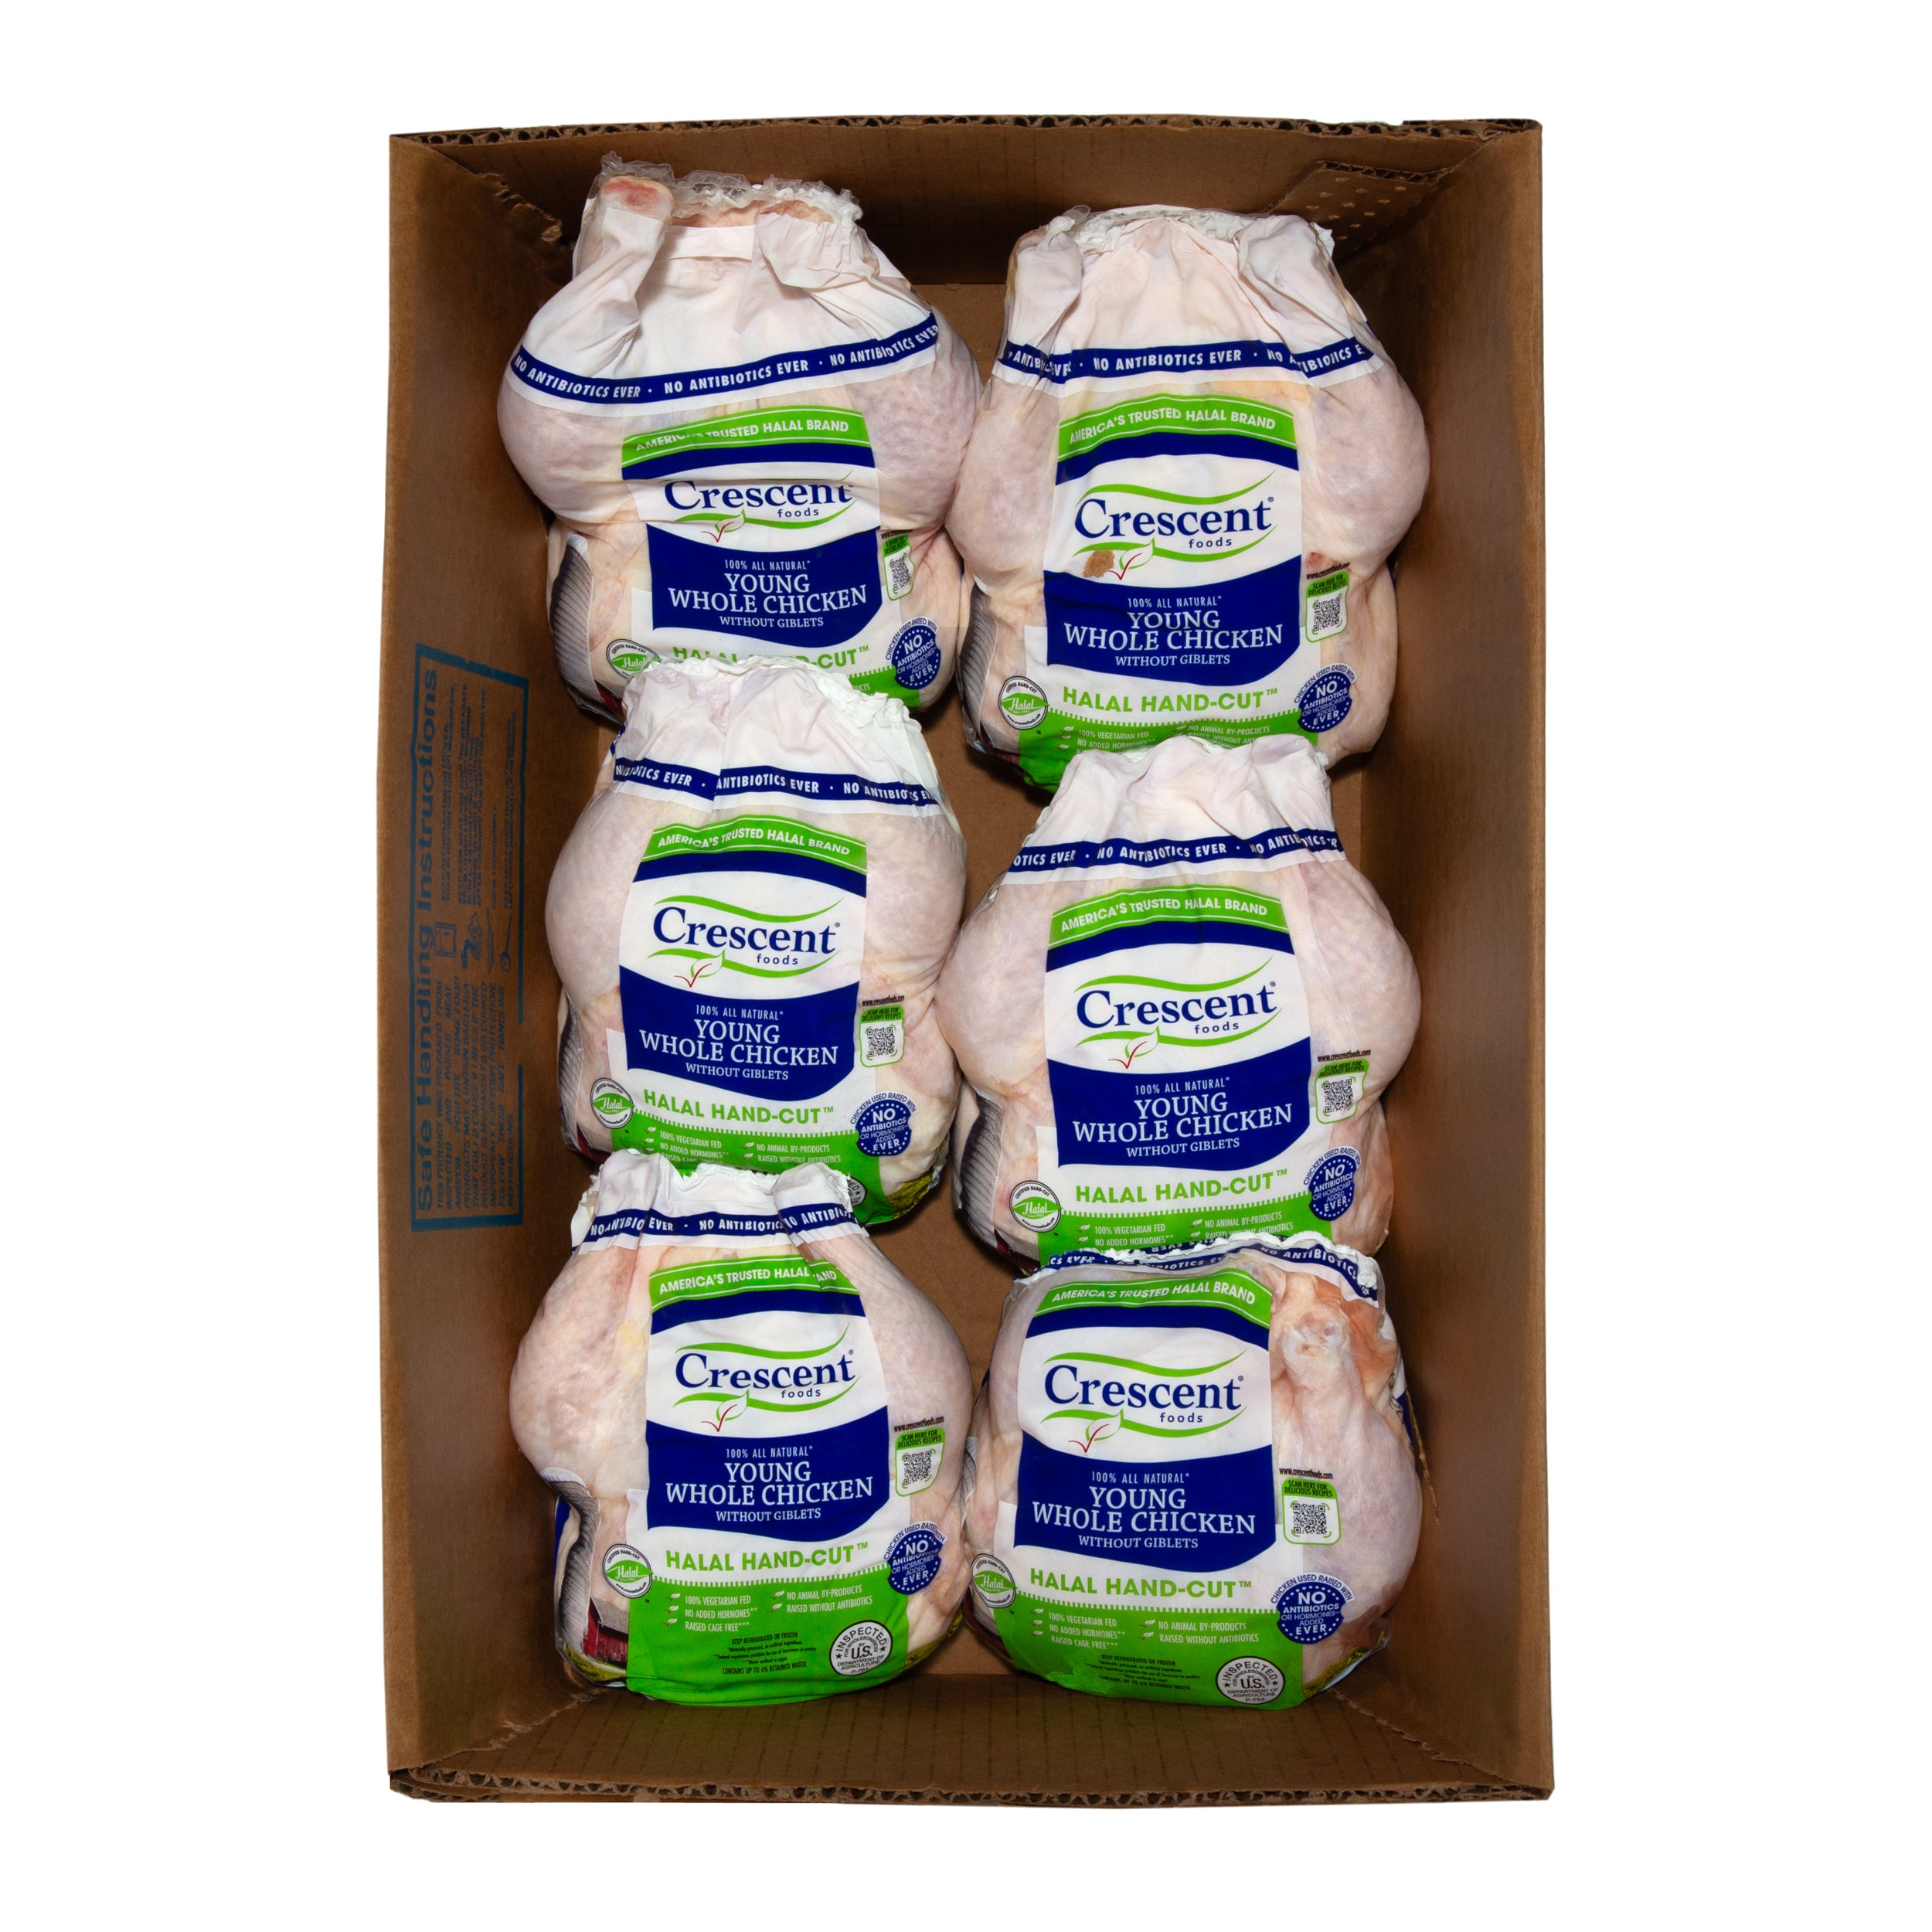 20 Pound Case - All Natural Halal Hand-Cut Whole Chicken